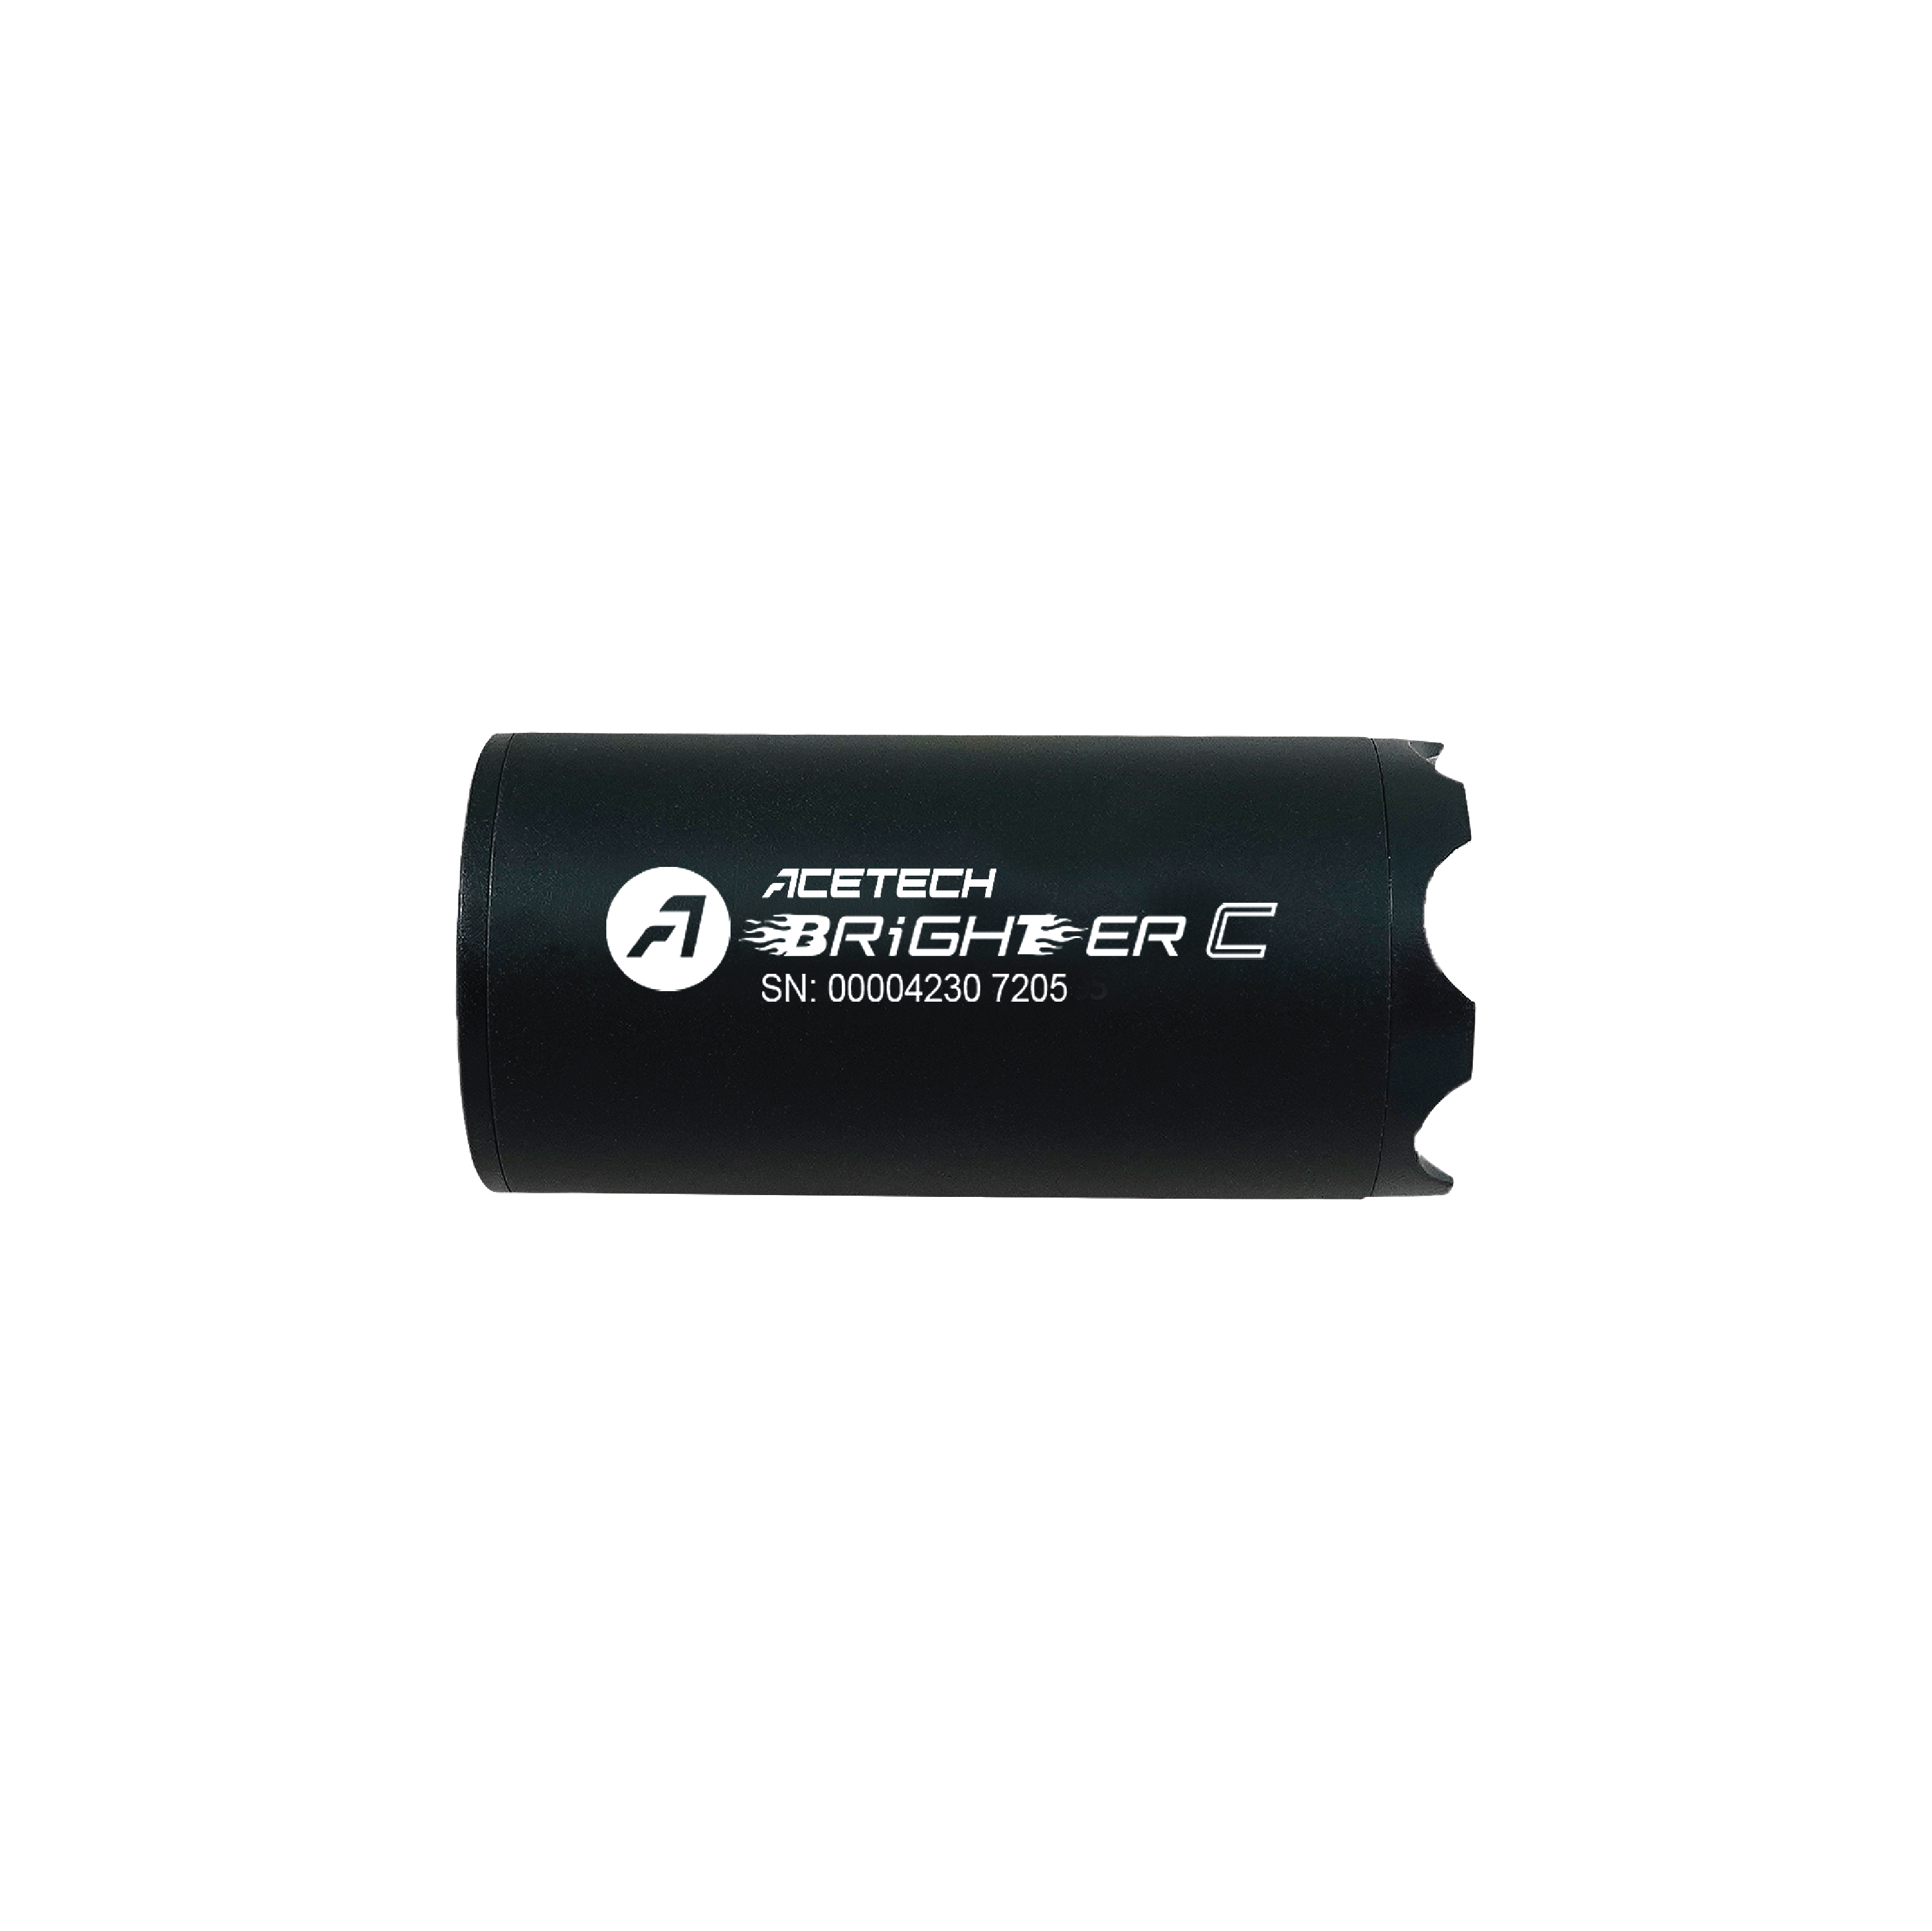 ACETECH Brighter C Tracer